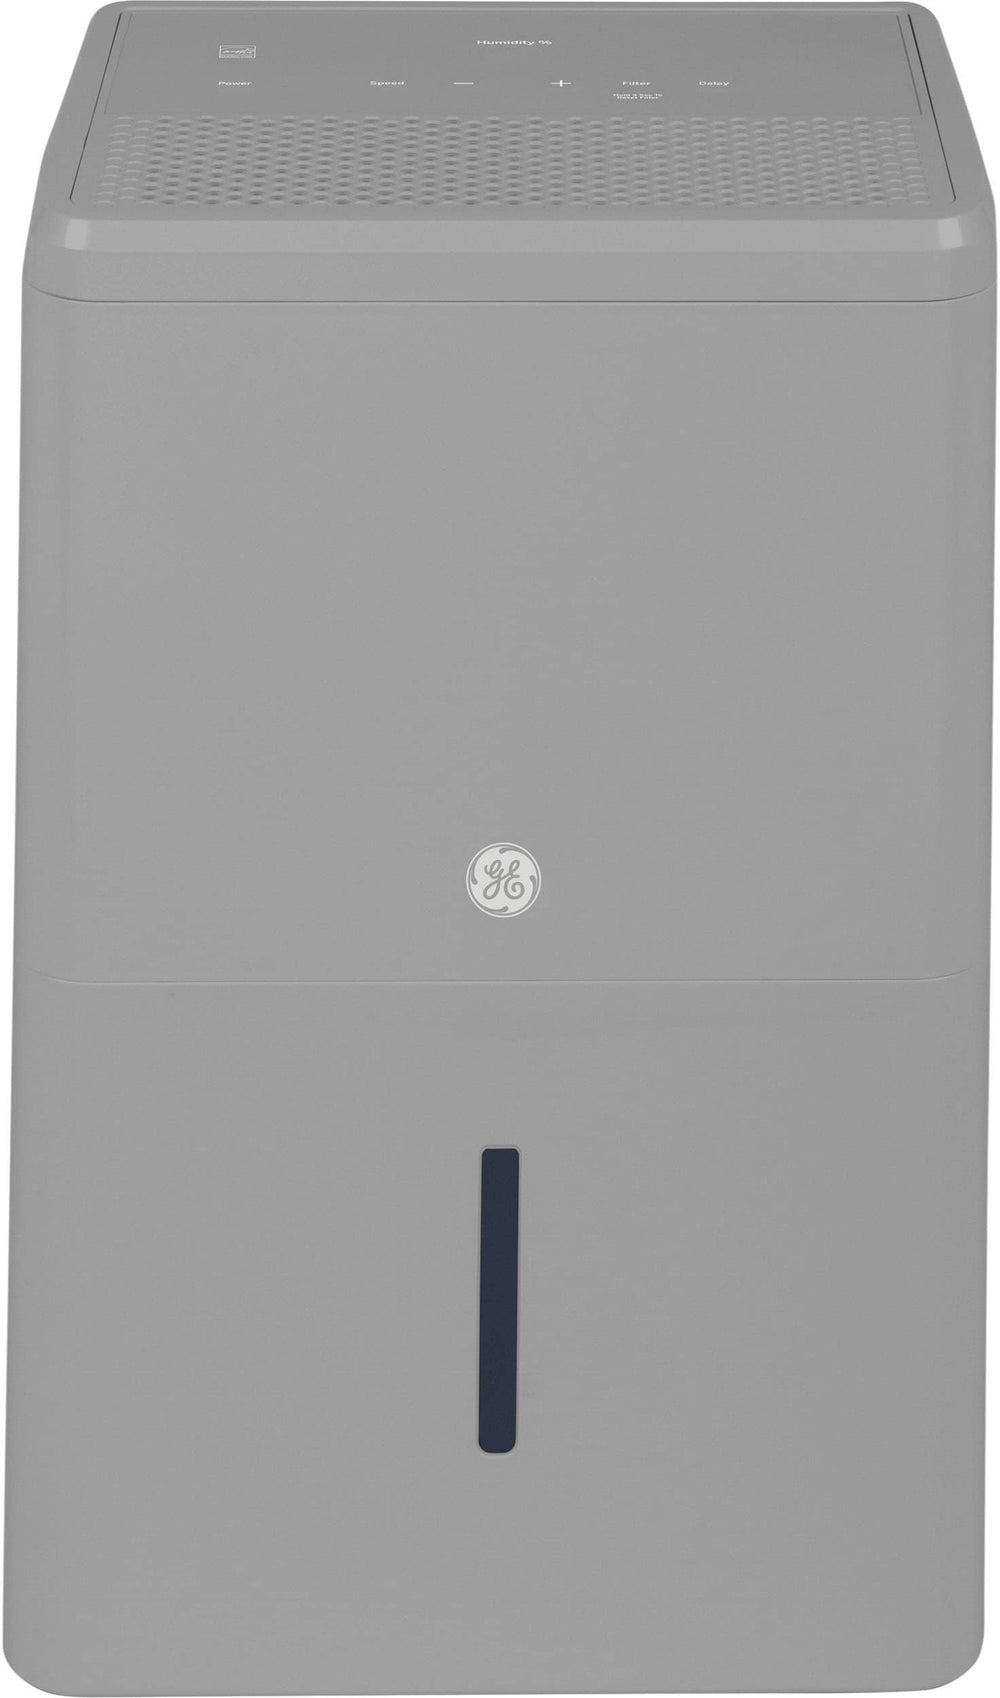 GE - 50-Pint Smart Portable Dehumidifier with WiFi and Smart Dry - Stratus Grey_1